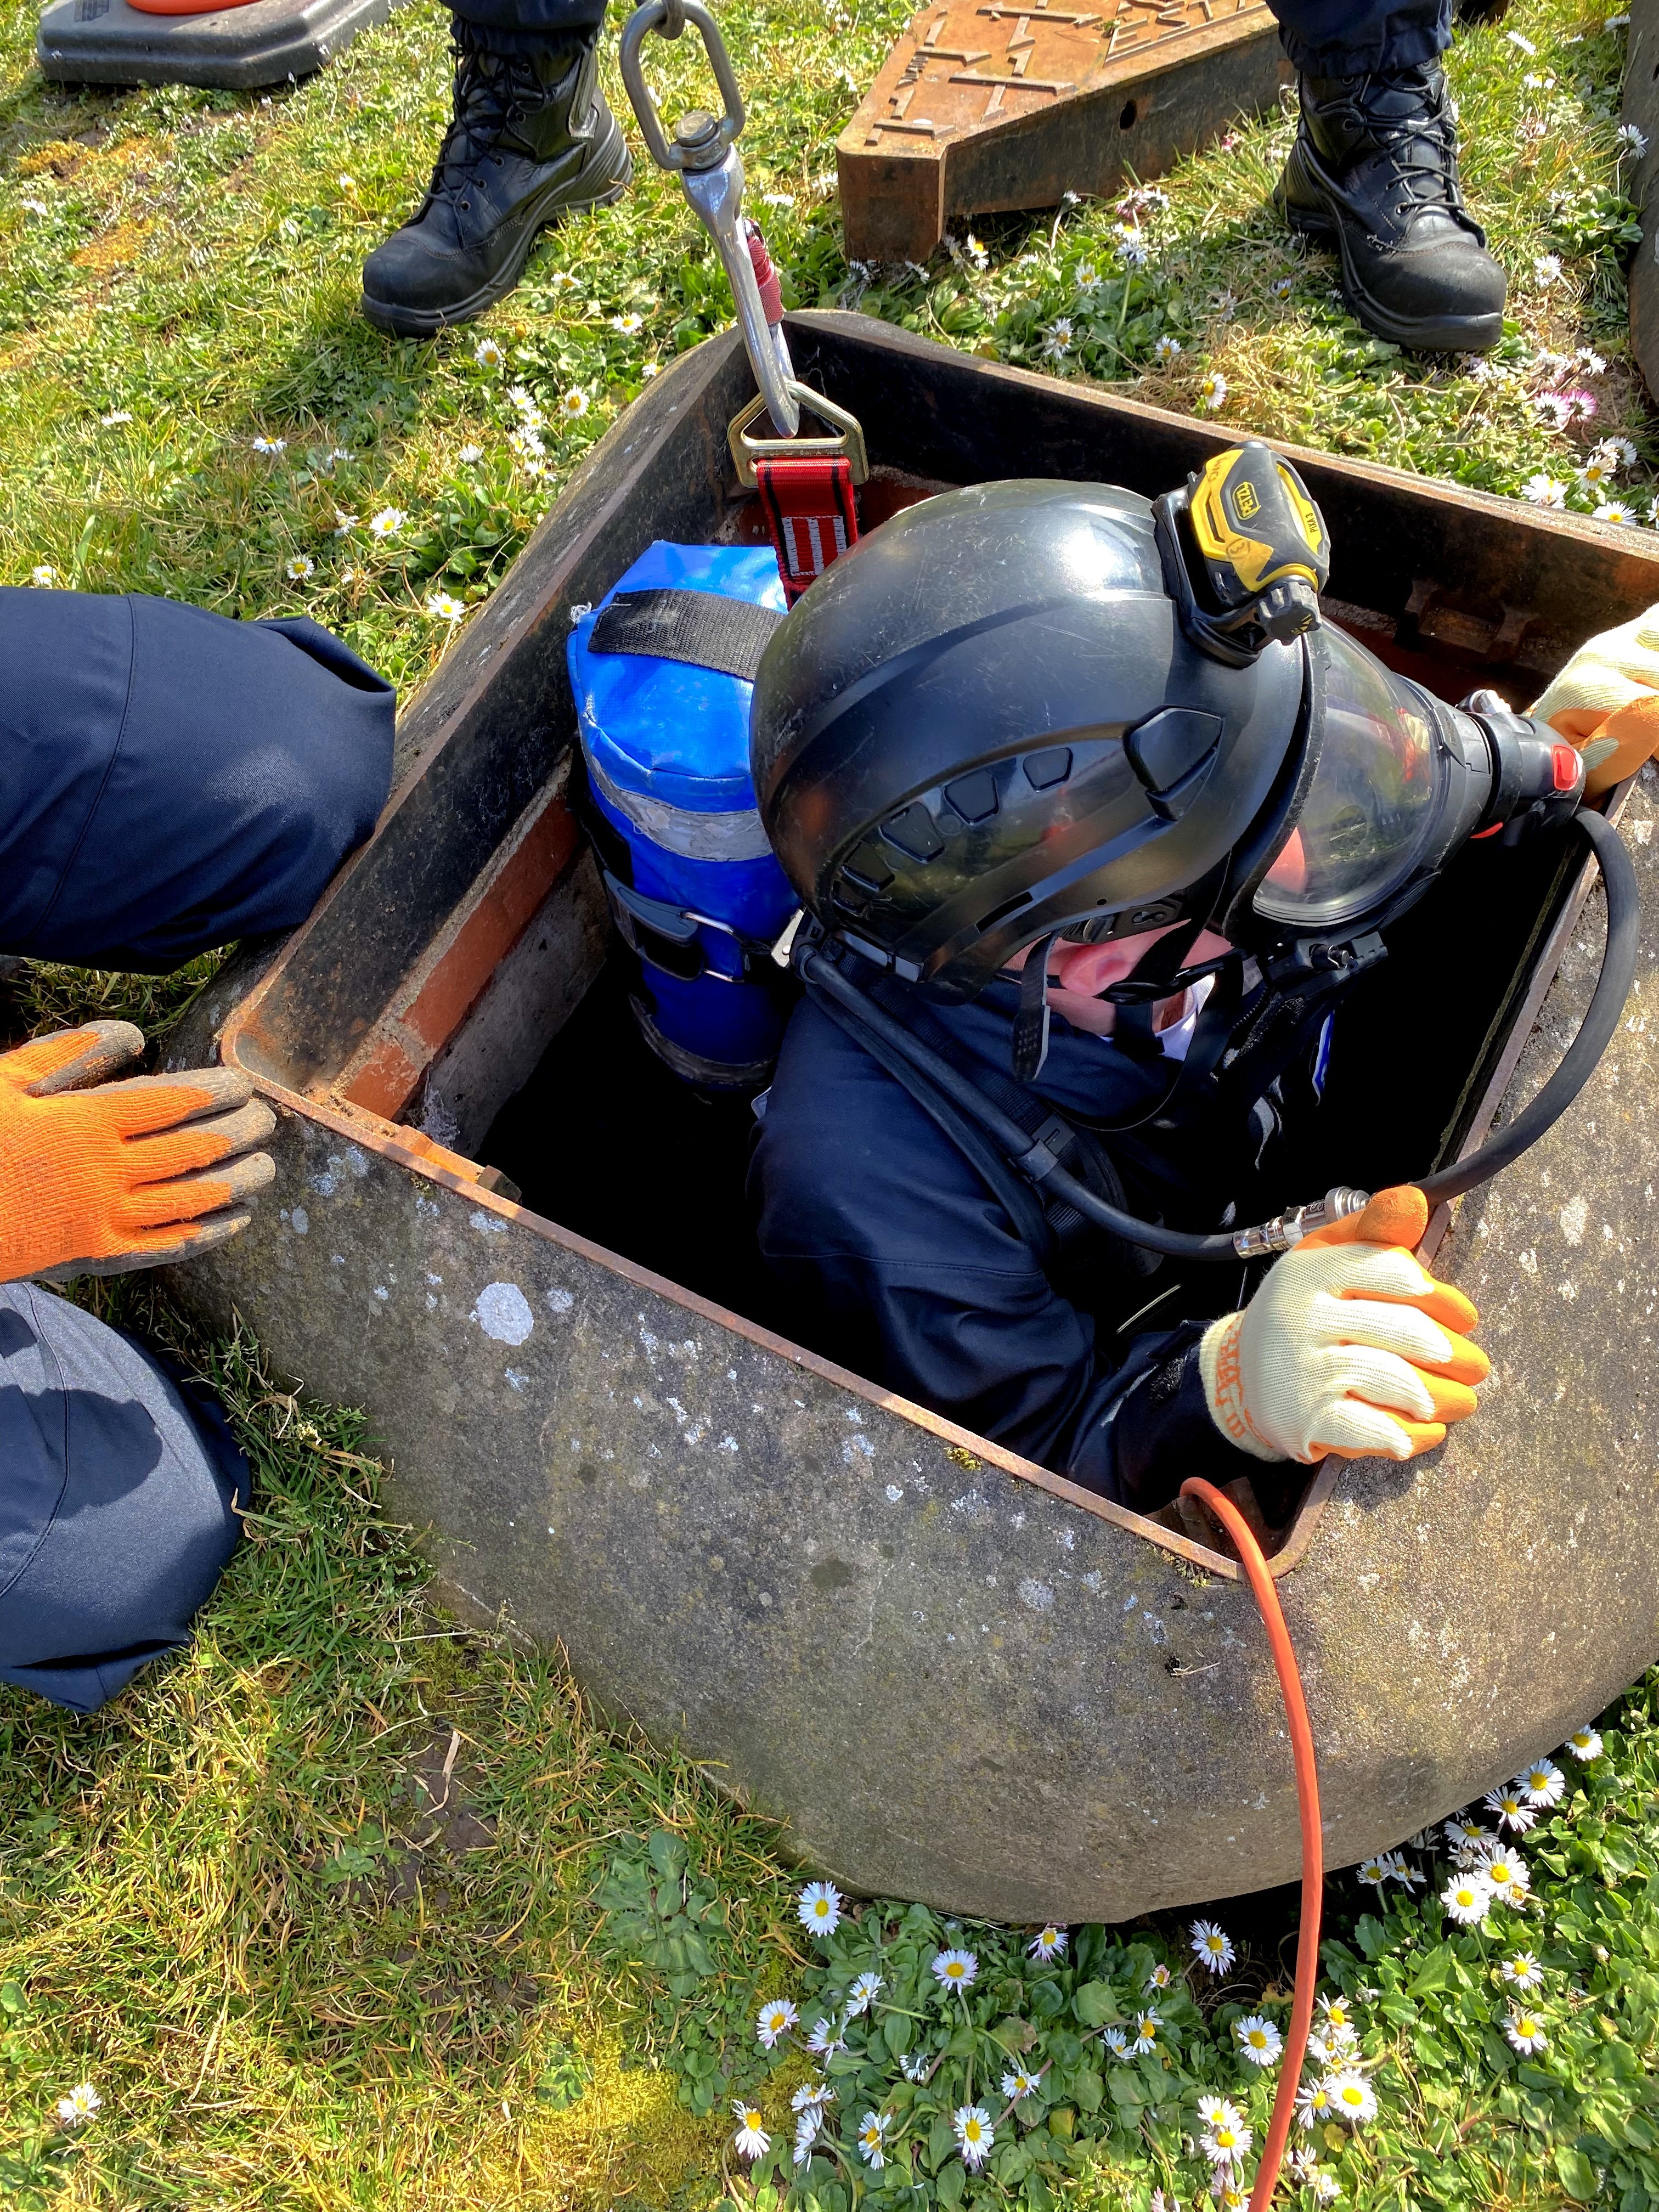 CS3 - Introduction to Working as a Member of a Confined Space Rescue Team